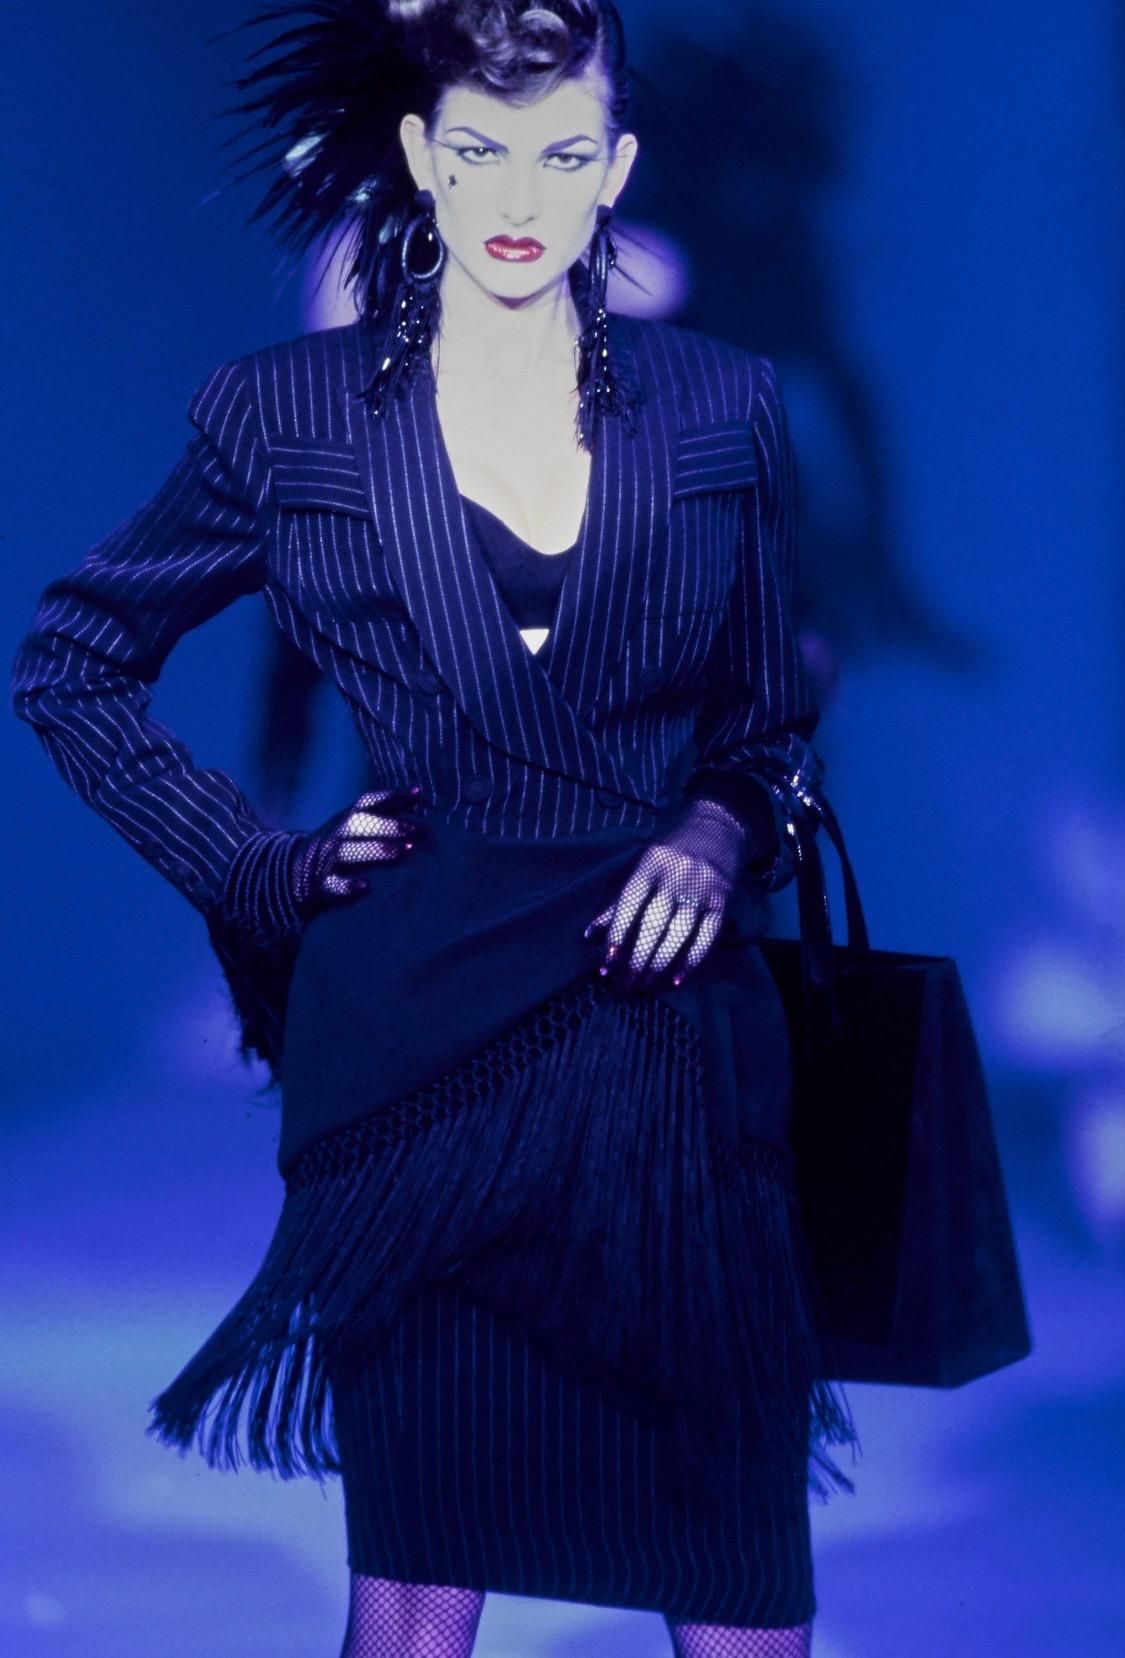 Presenting a chic Thierry Mugler blazer, designed by Manfred Mugler. From the Spring/Summer 1997 'Les Insectes' Couture collection this blazer features masterful design and tailoring with similar designs being presented on the season's runway. The